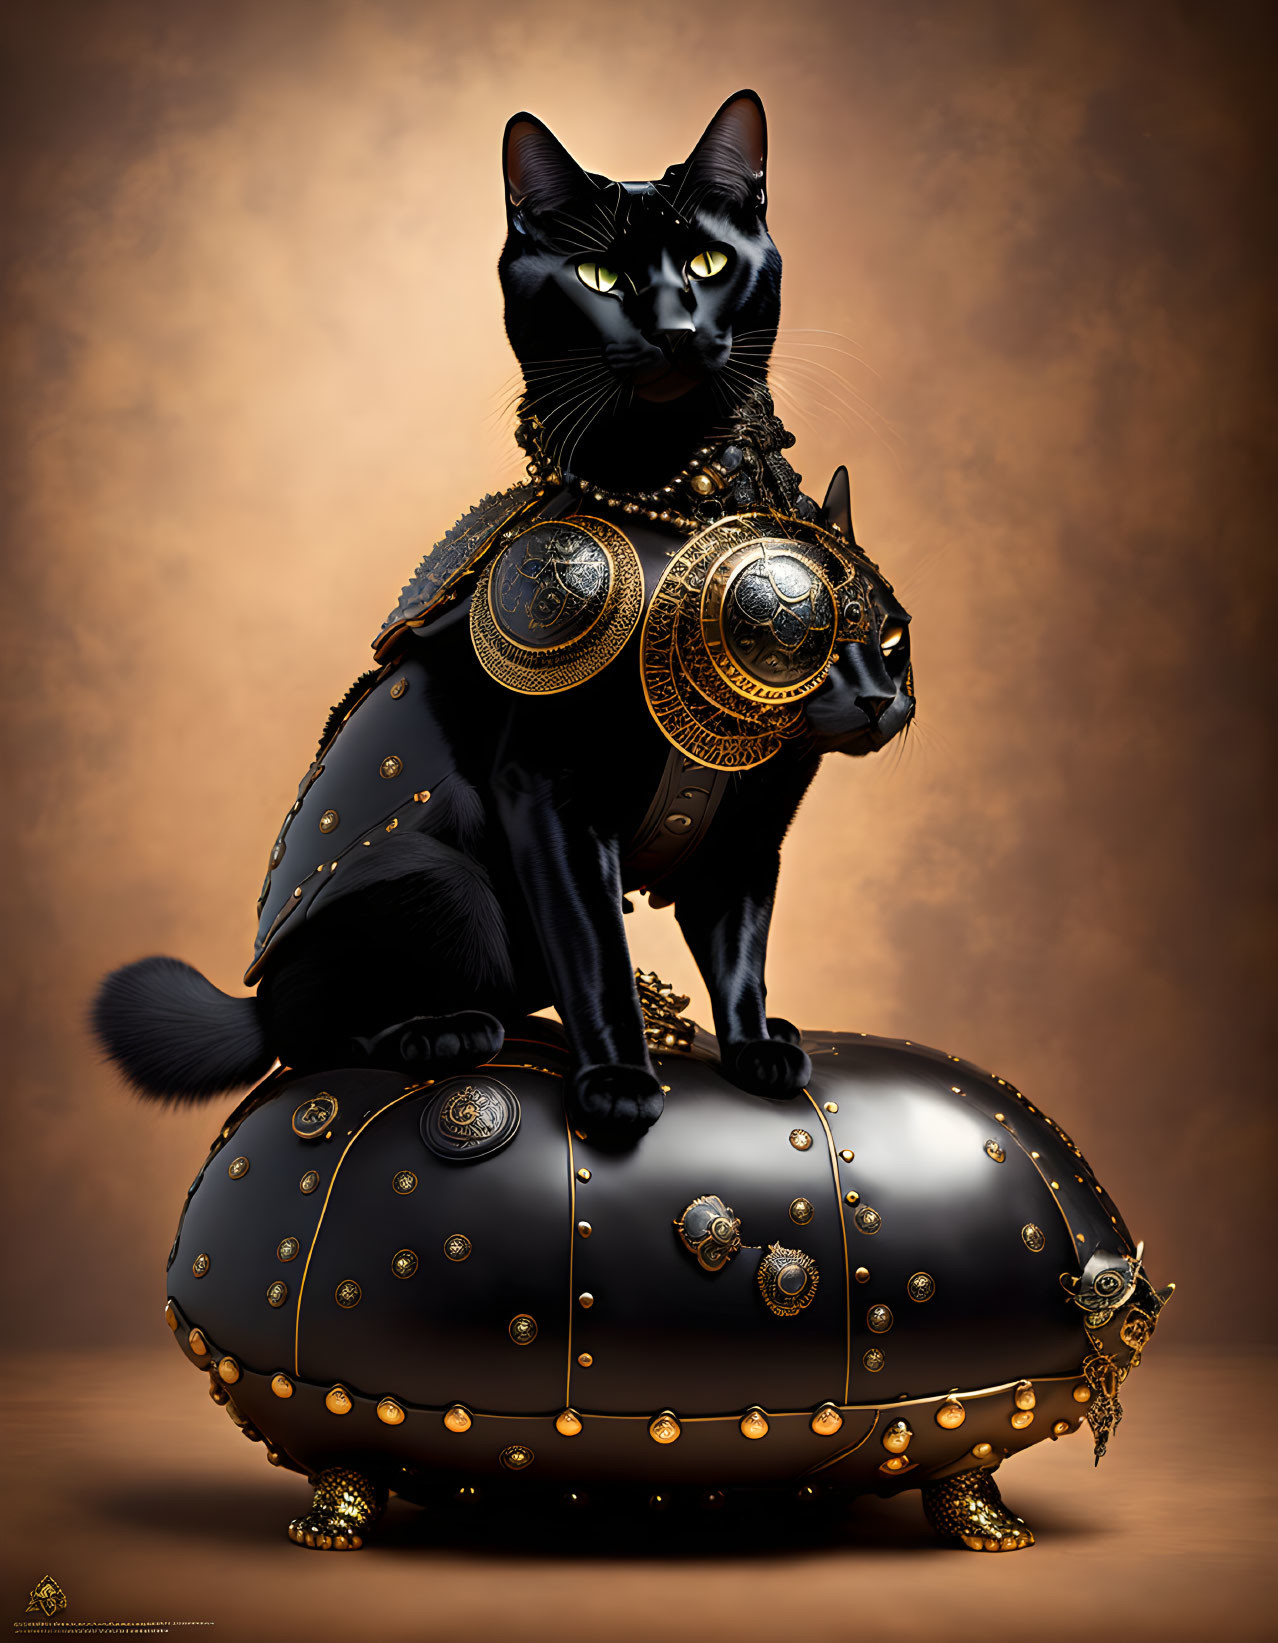 Black Cat with Golden Jewelry on Golden Cushion in Regal Pose